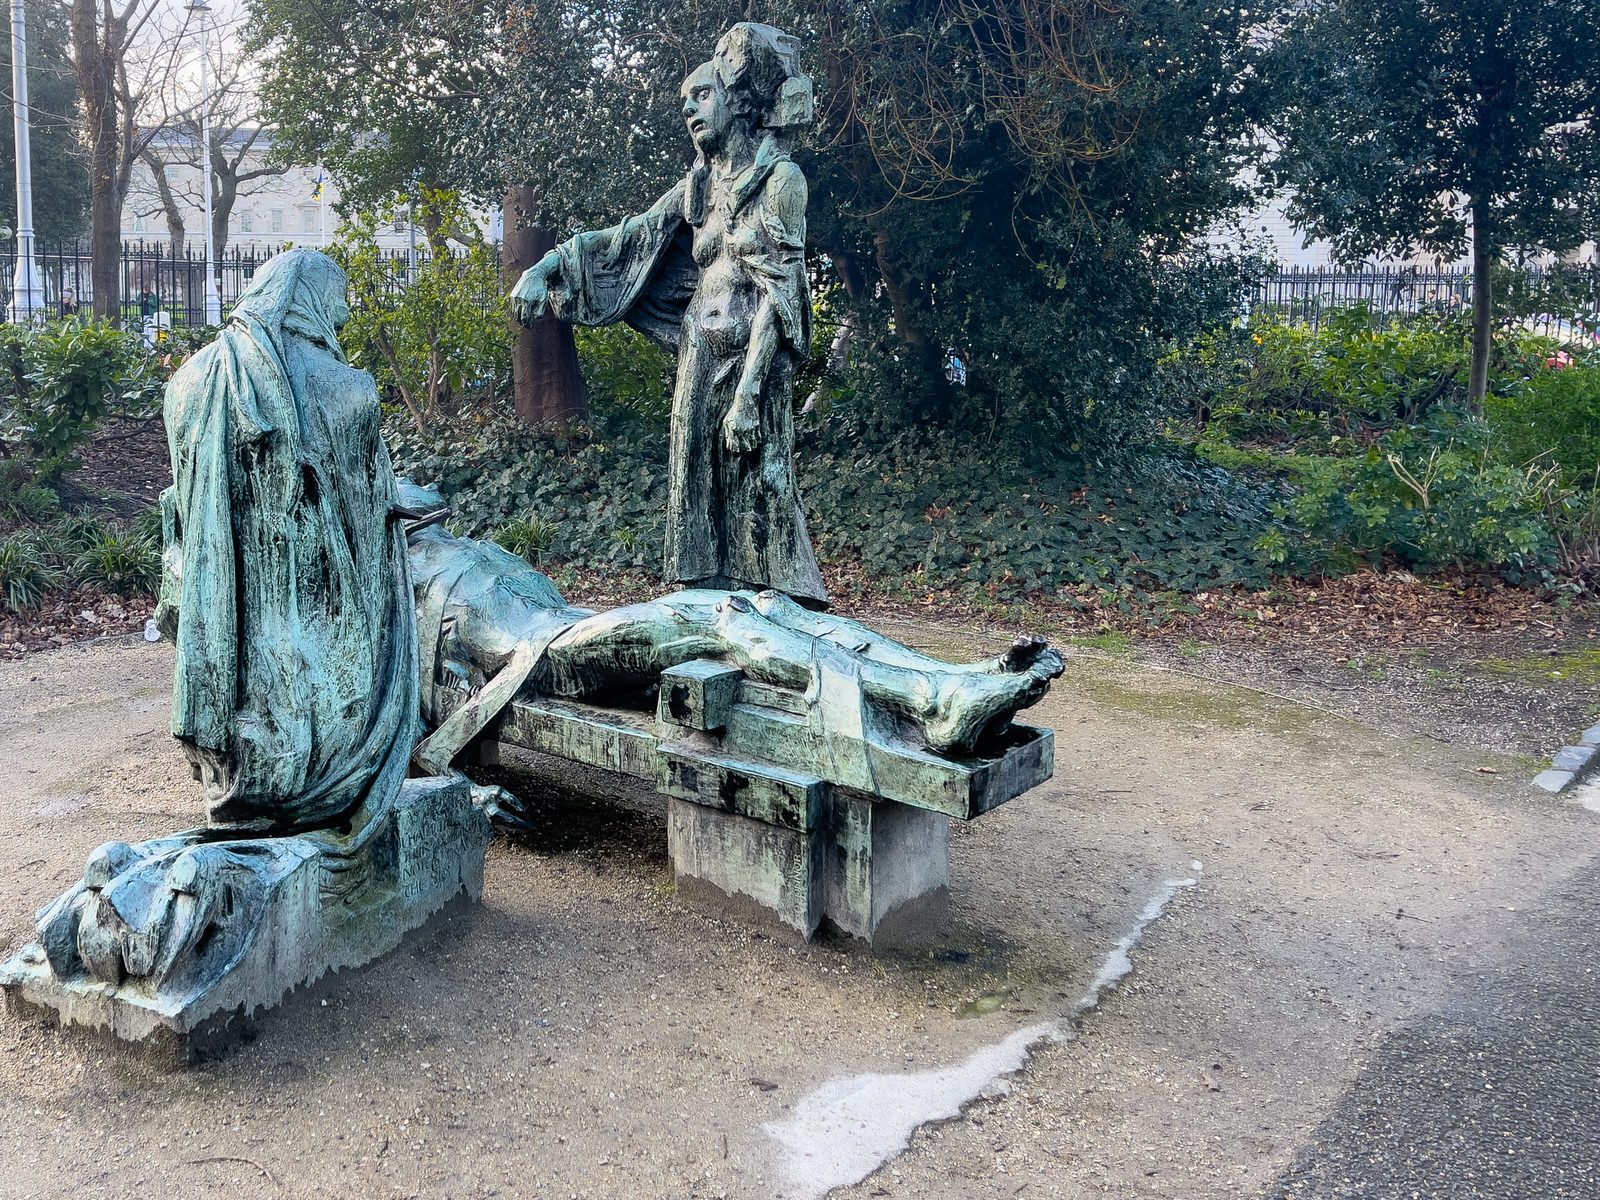 THE VICTIMS BY ANDREW O’CONNOR IN MERRION SQUARE PARK 005